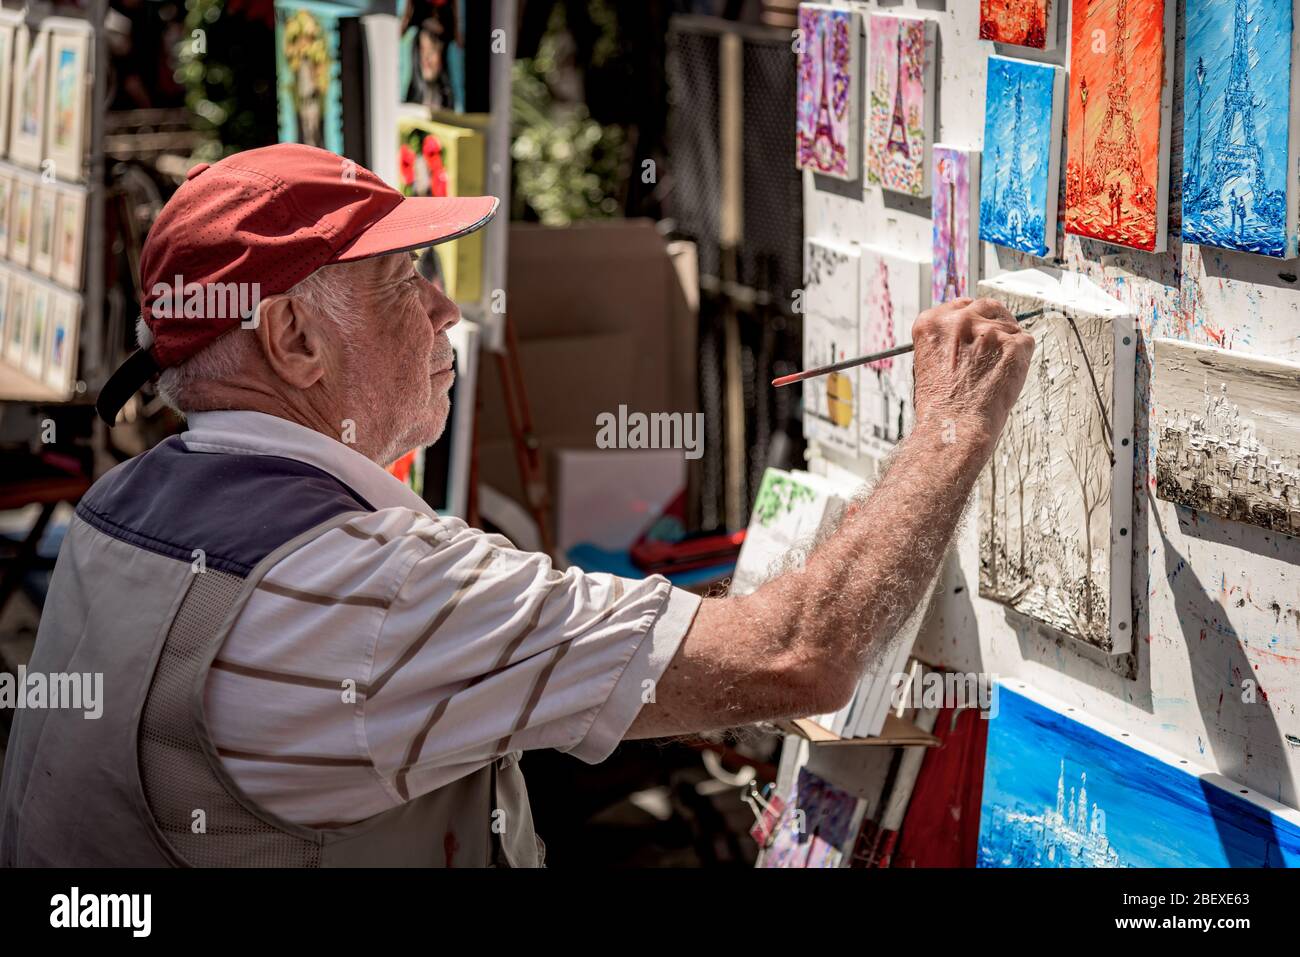 An old man painter works in the open air artist market in Tertre Square (Place du Tertre), Montmartre district near the Basilica of the Sacre Coeur. Stock Photo